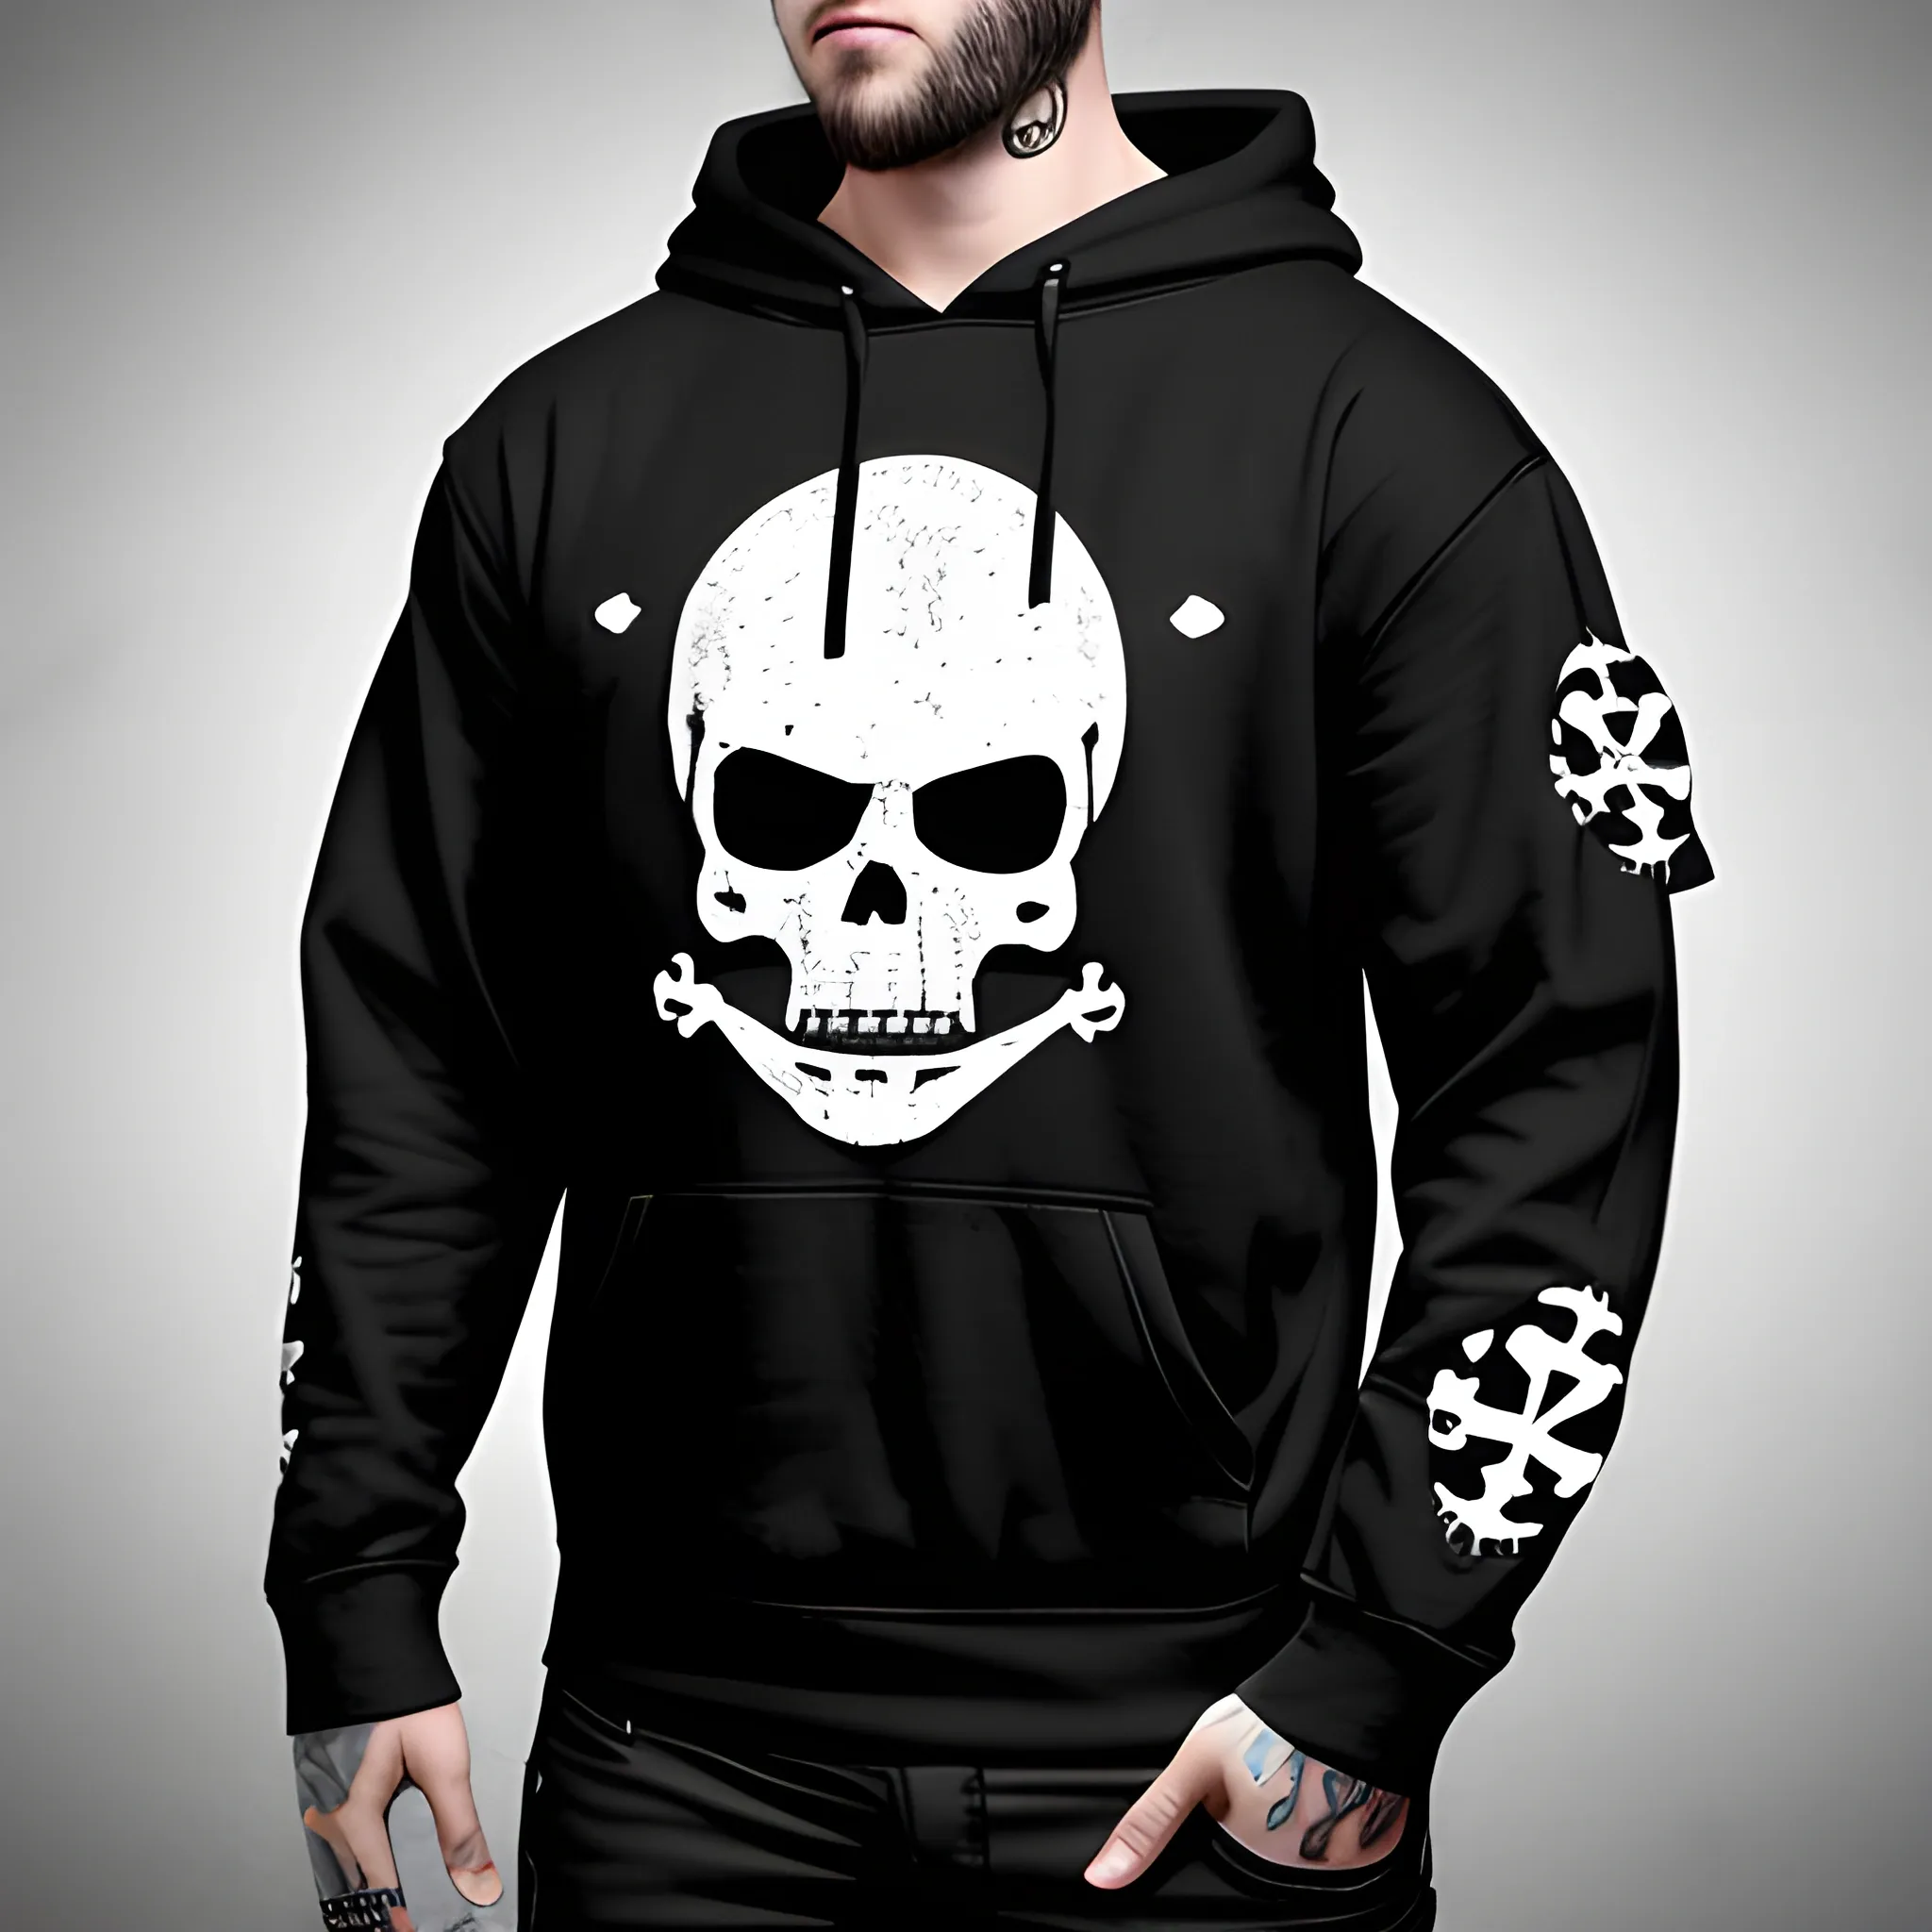 White Punk Character, Black Hoddie With Crossbones logo in the front, extremely high quality, Pirate Left Patch